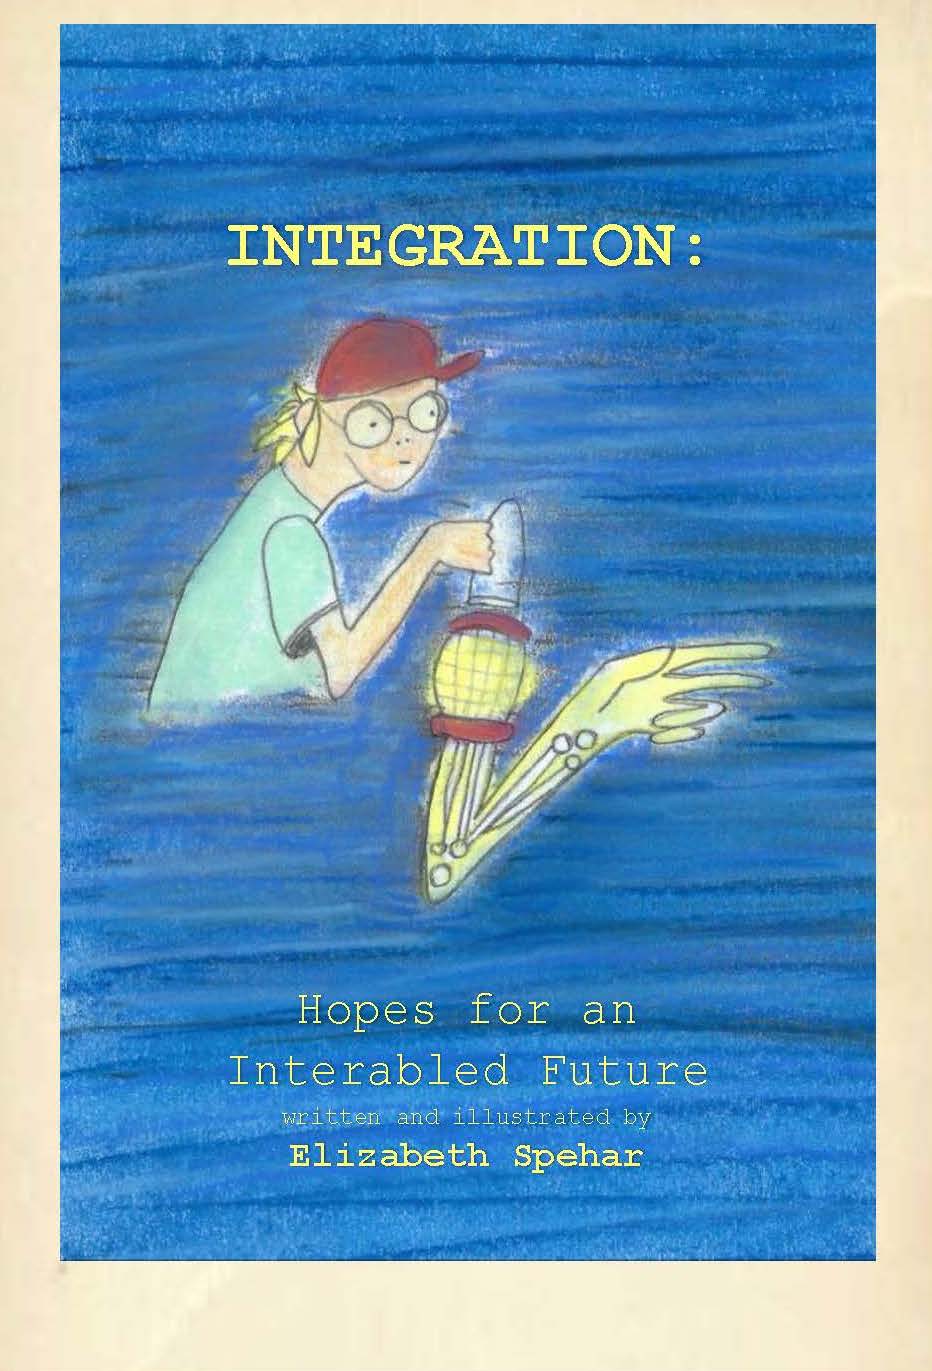 cover page for "Integration", a figure holding a robotic arm emerges from a blue background